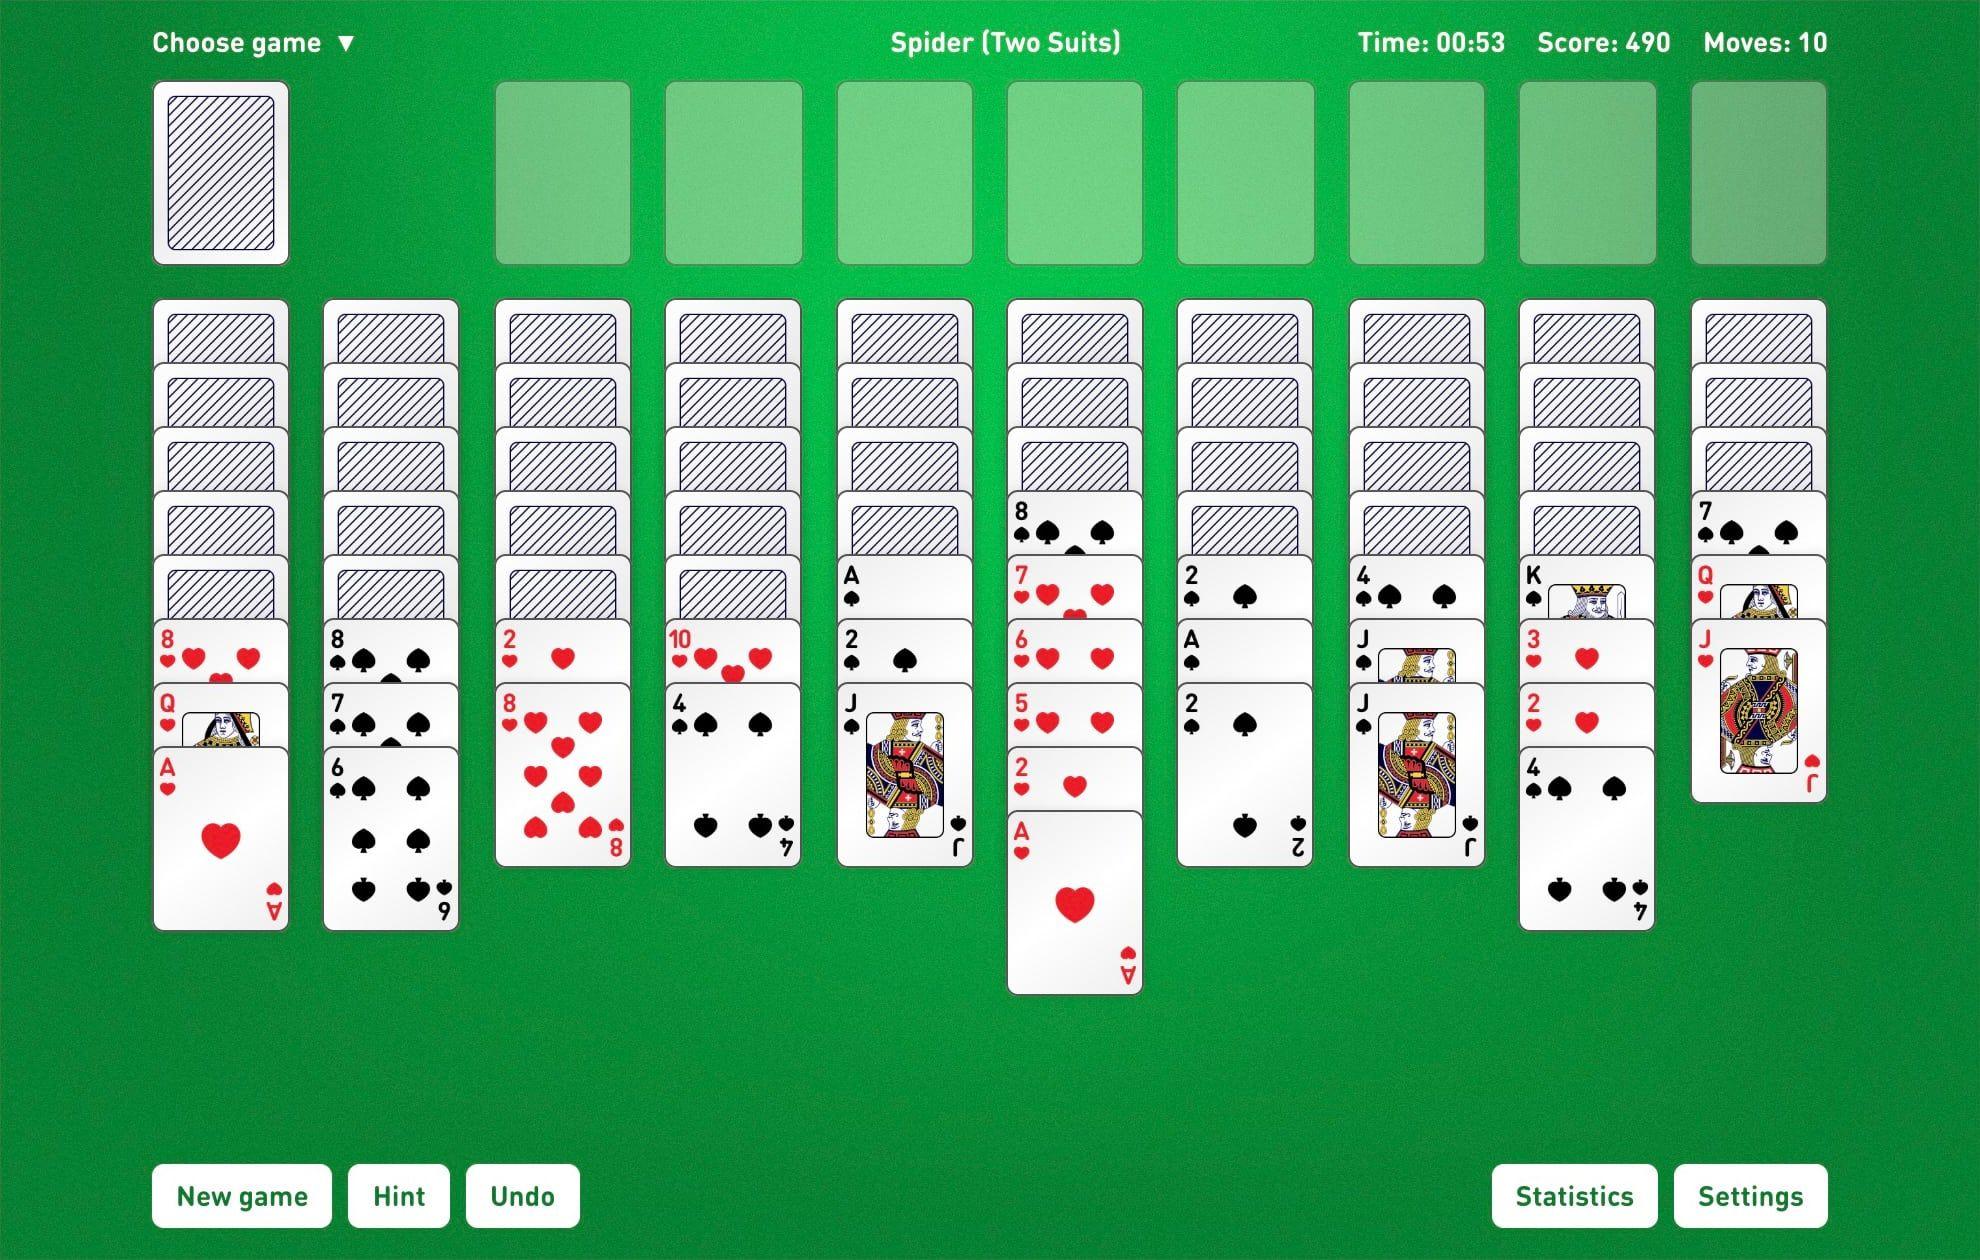 2 suit spider solitaire free